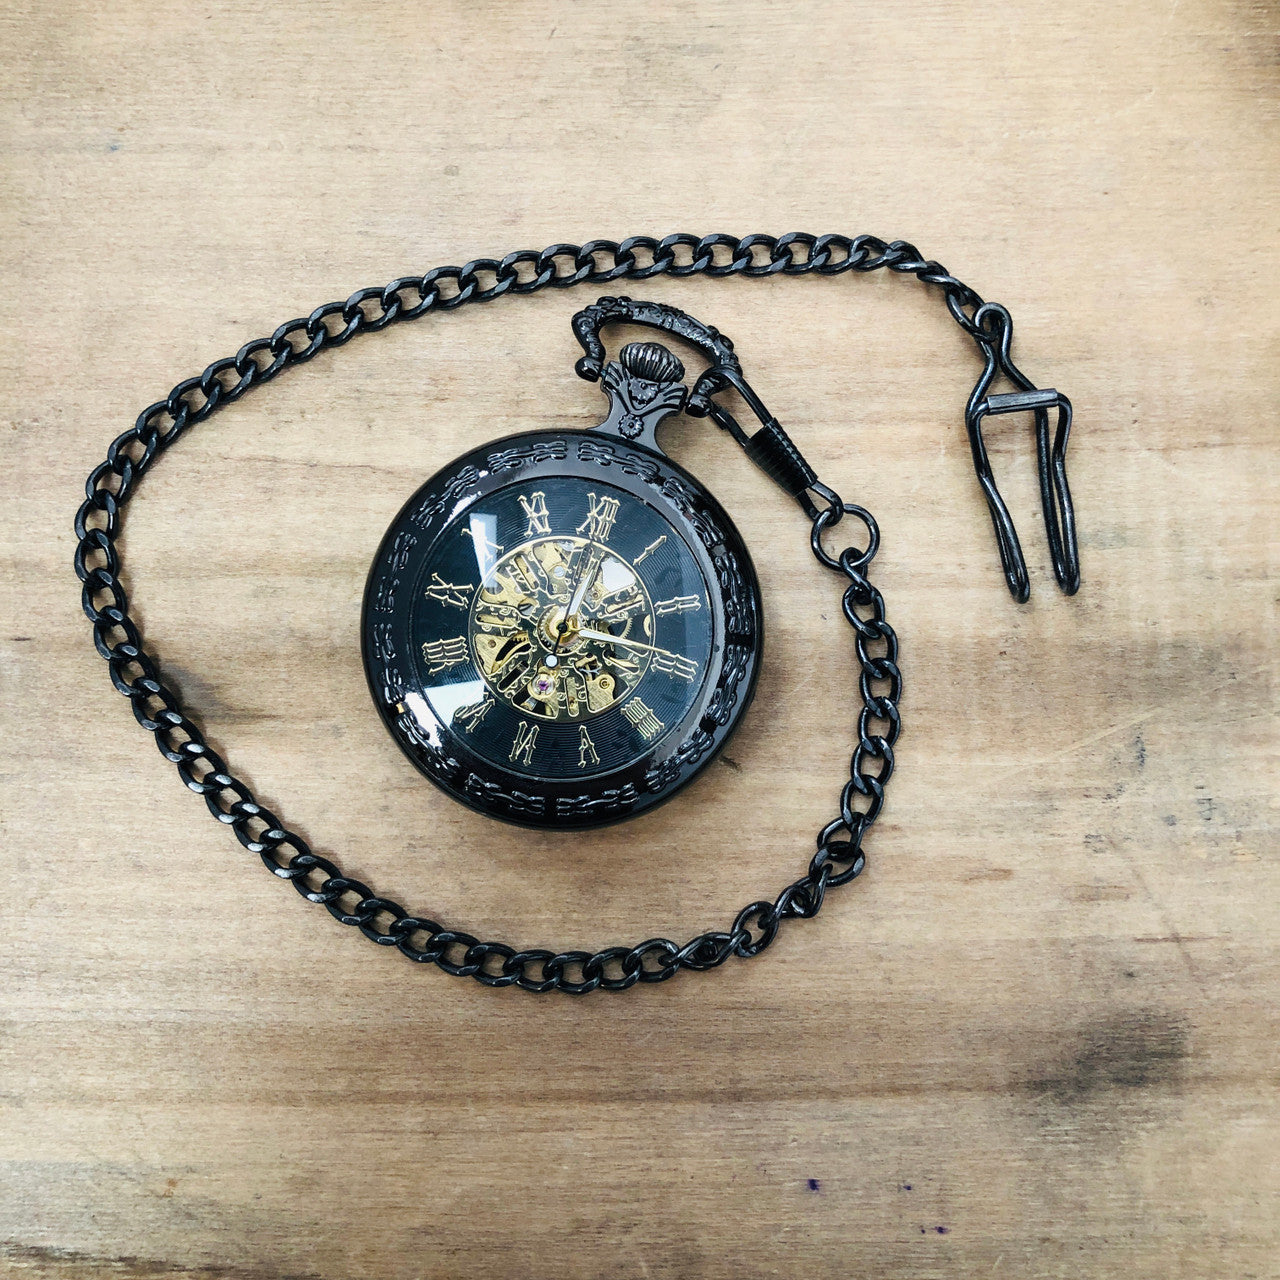 Vintage Style, Wind Up, Manual, and Battery Run, Pocket Watch, with Chain, Steampunk